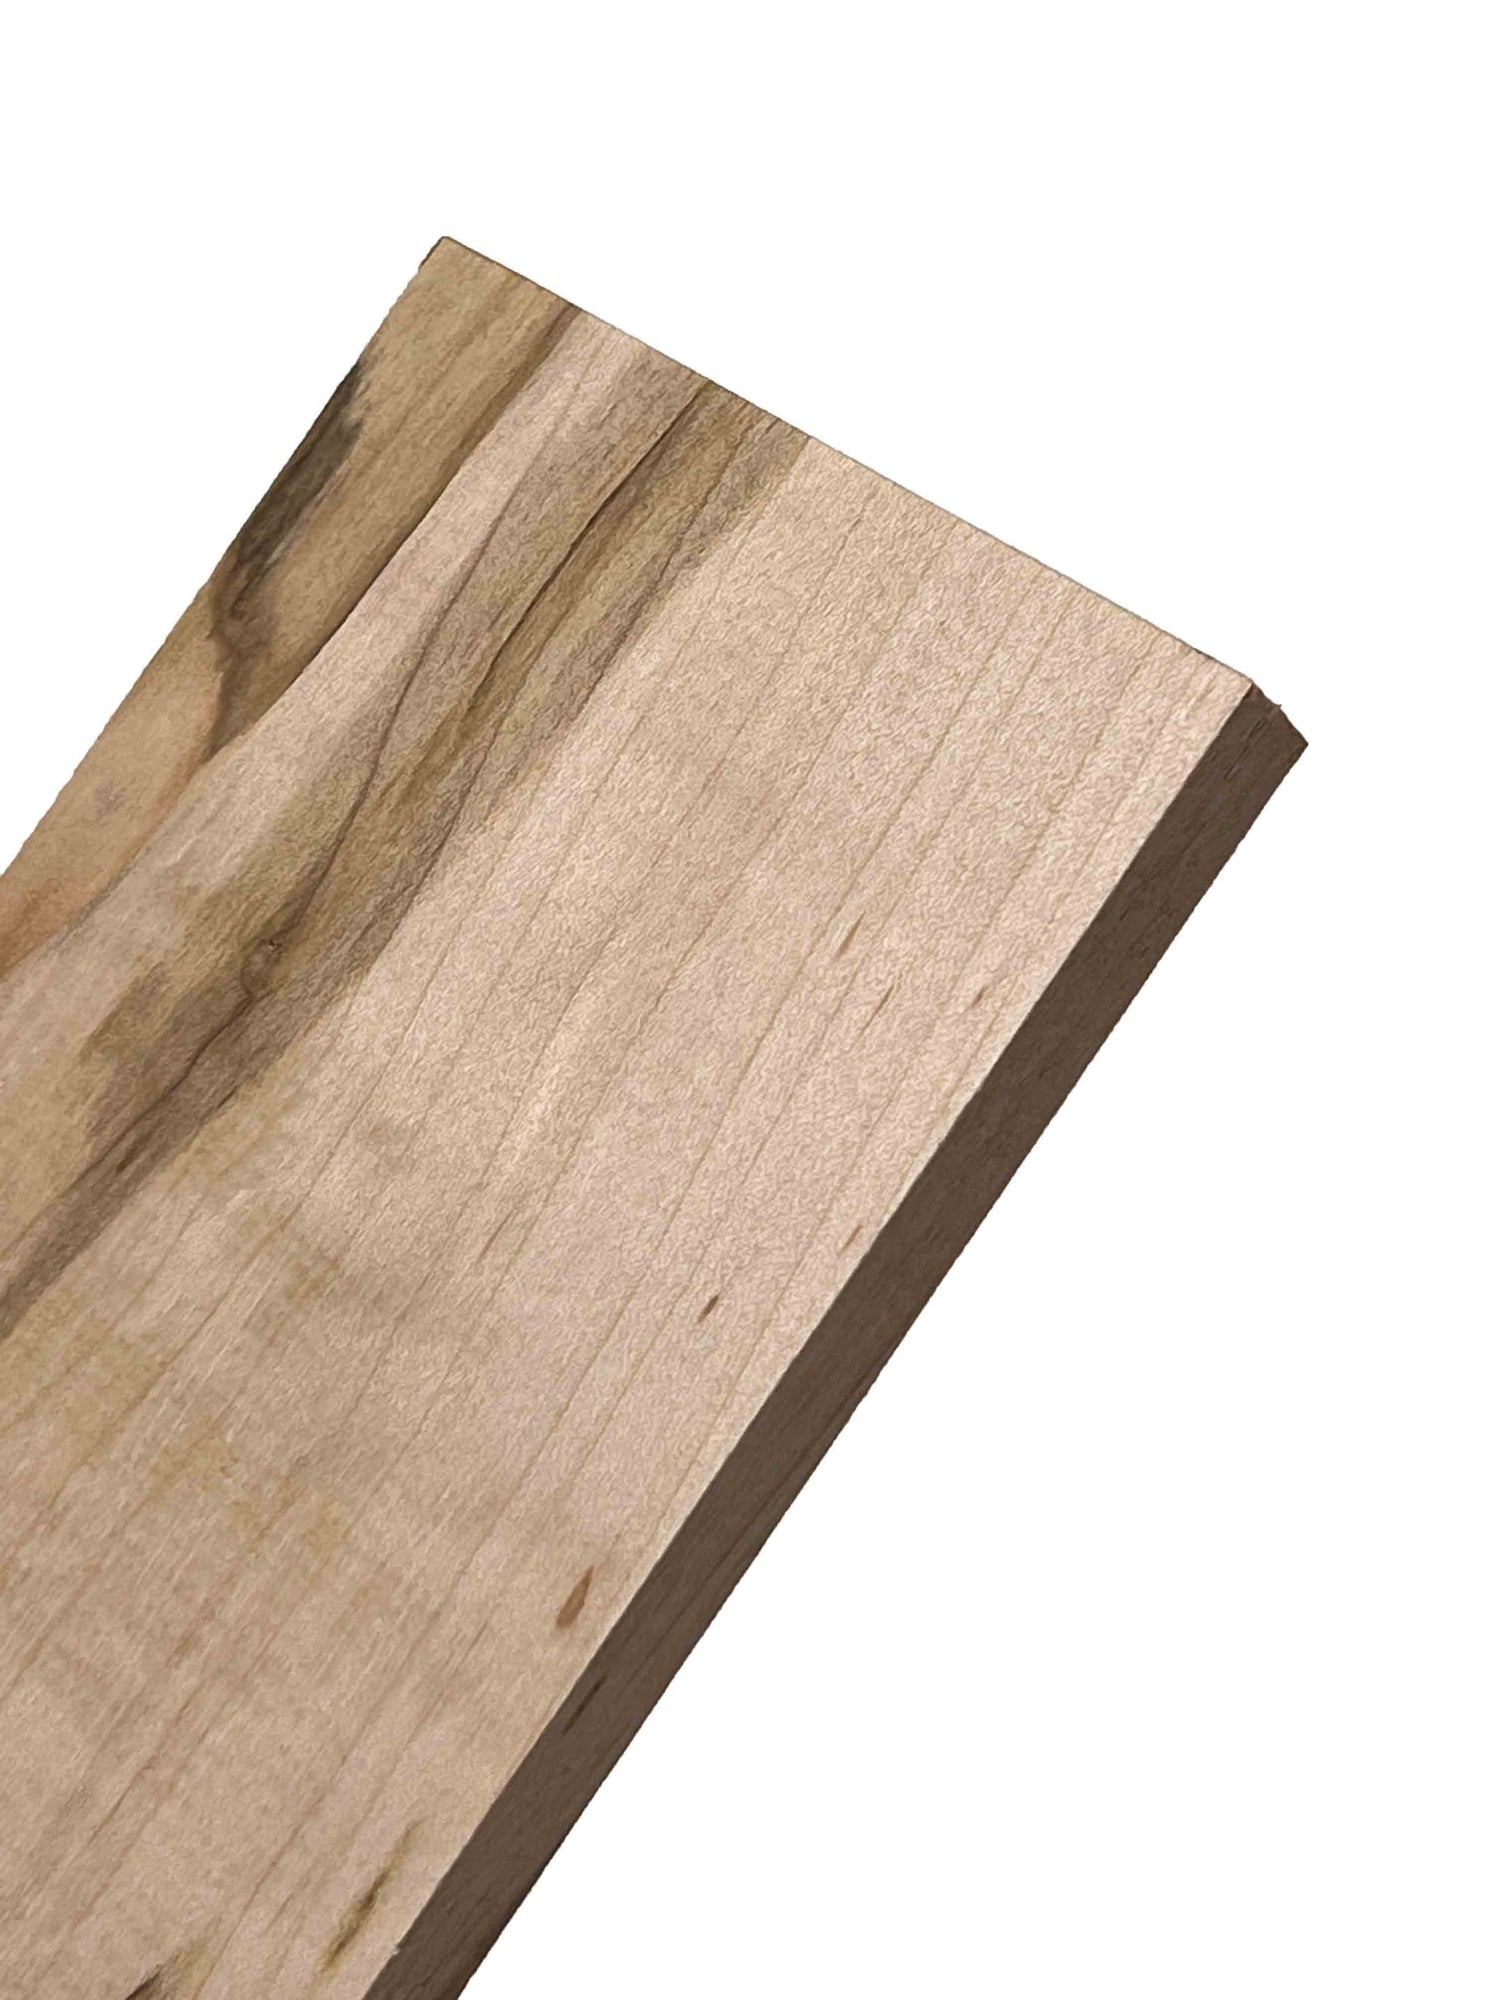 Ambrosia Maple Thin Stock Lumber Boards Wood Crafts - Exotic Wood Zone - Buy online Across USA 